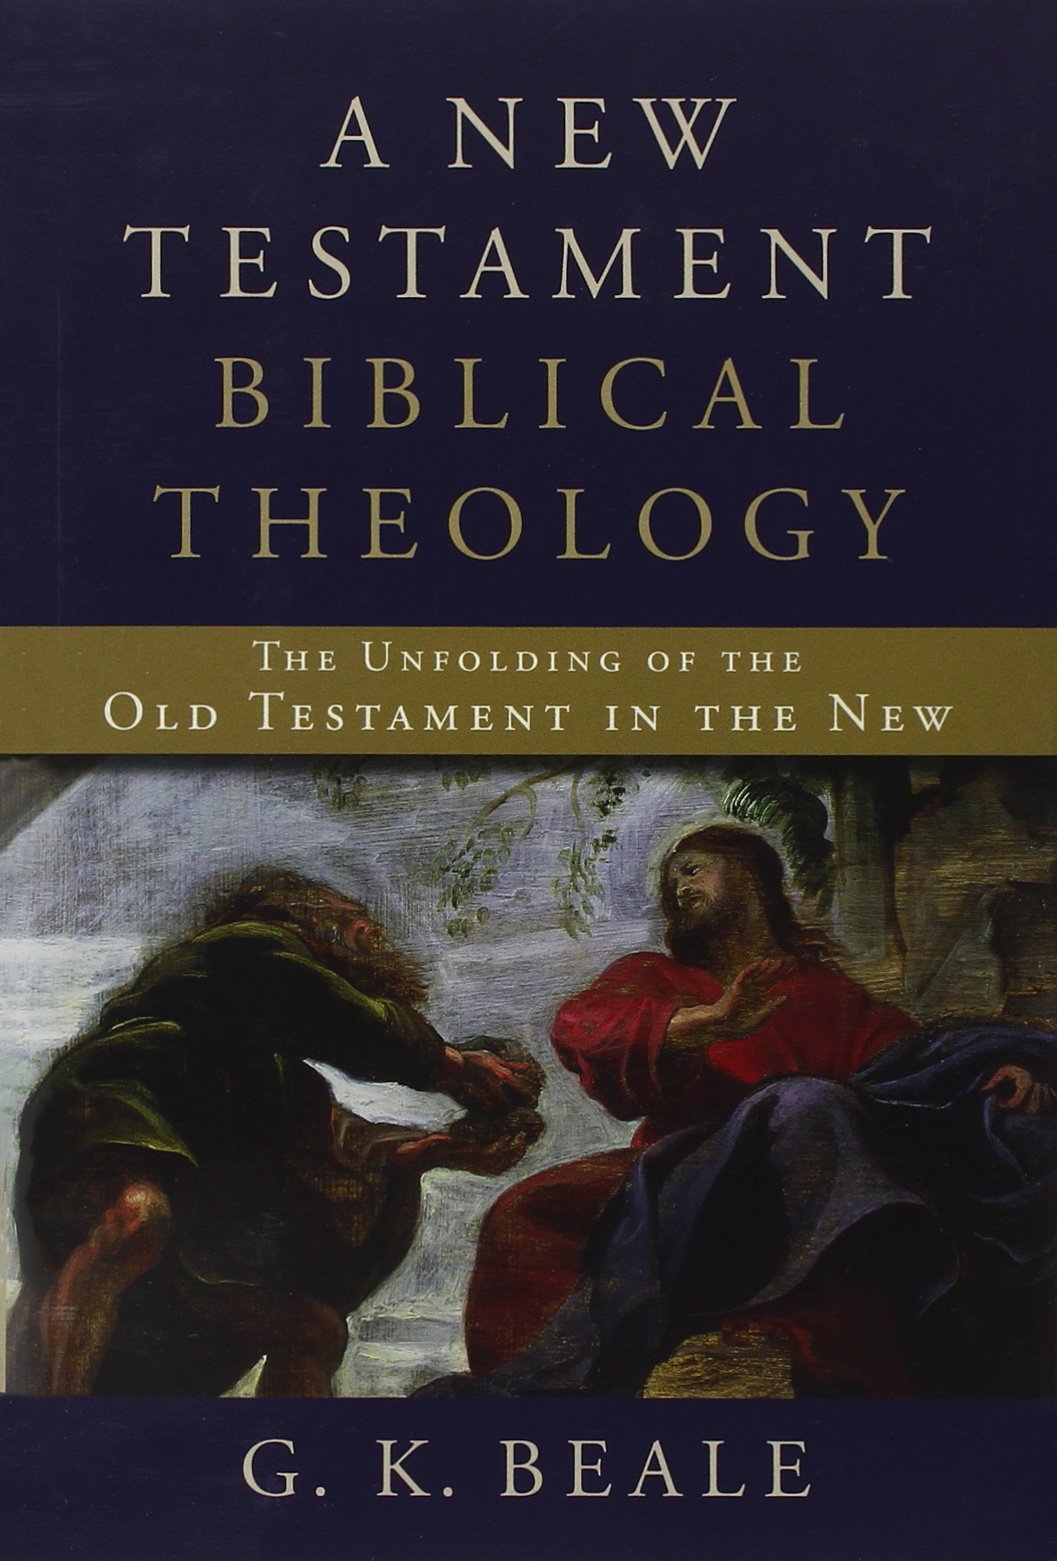 Book Notice: A NEW TESTAMENT BIBLICAL THEOLOGY: THE UNFOLDING OF THE OLD TESTAMENT IN THE NEW, by Gregory Beale